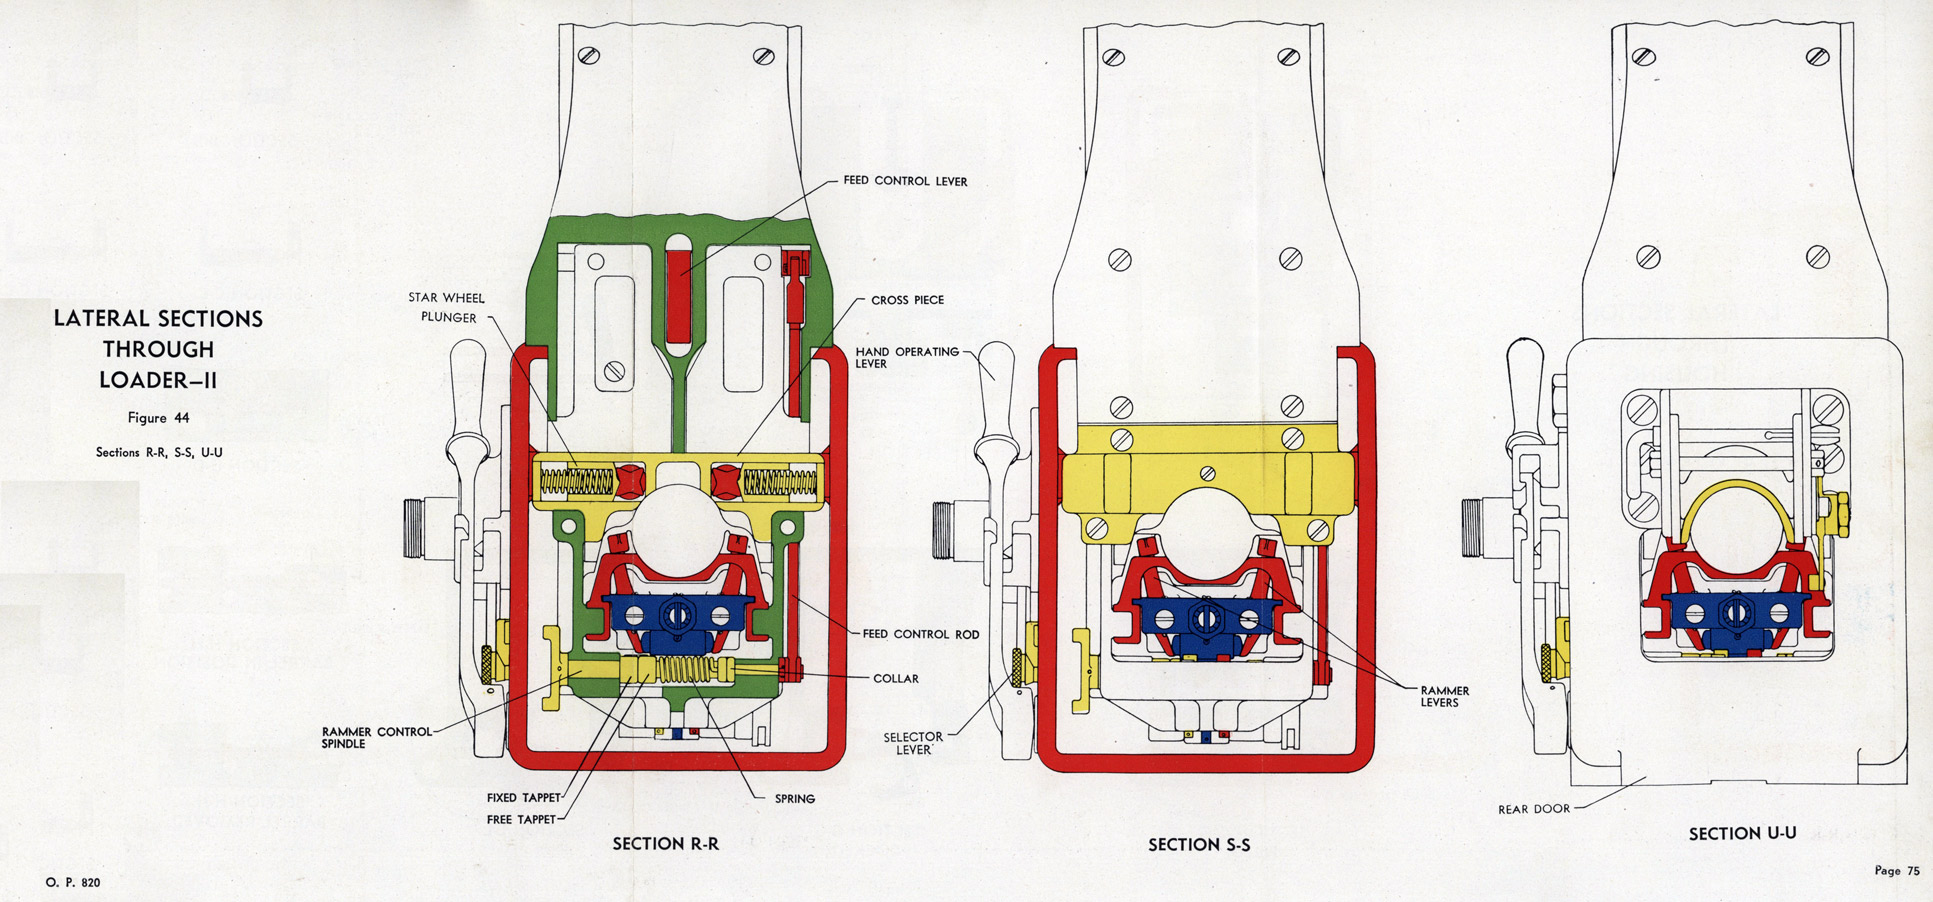 LATERAL SECTIONS
THROUGH
LOADER-II
Figure 44
Sections R-R, S-S, U-U